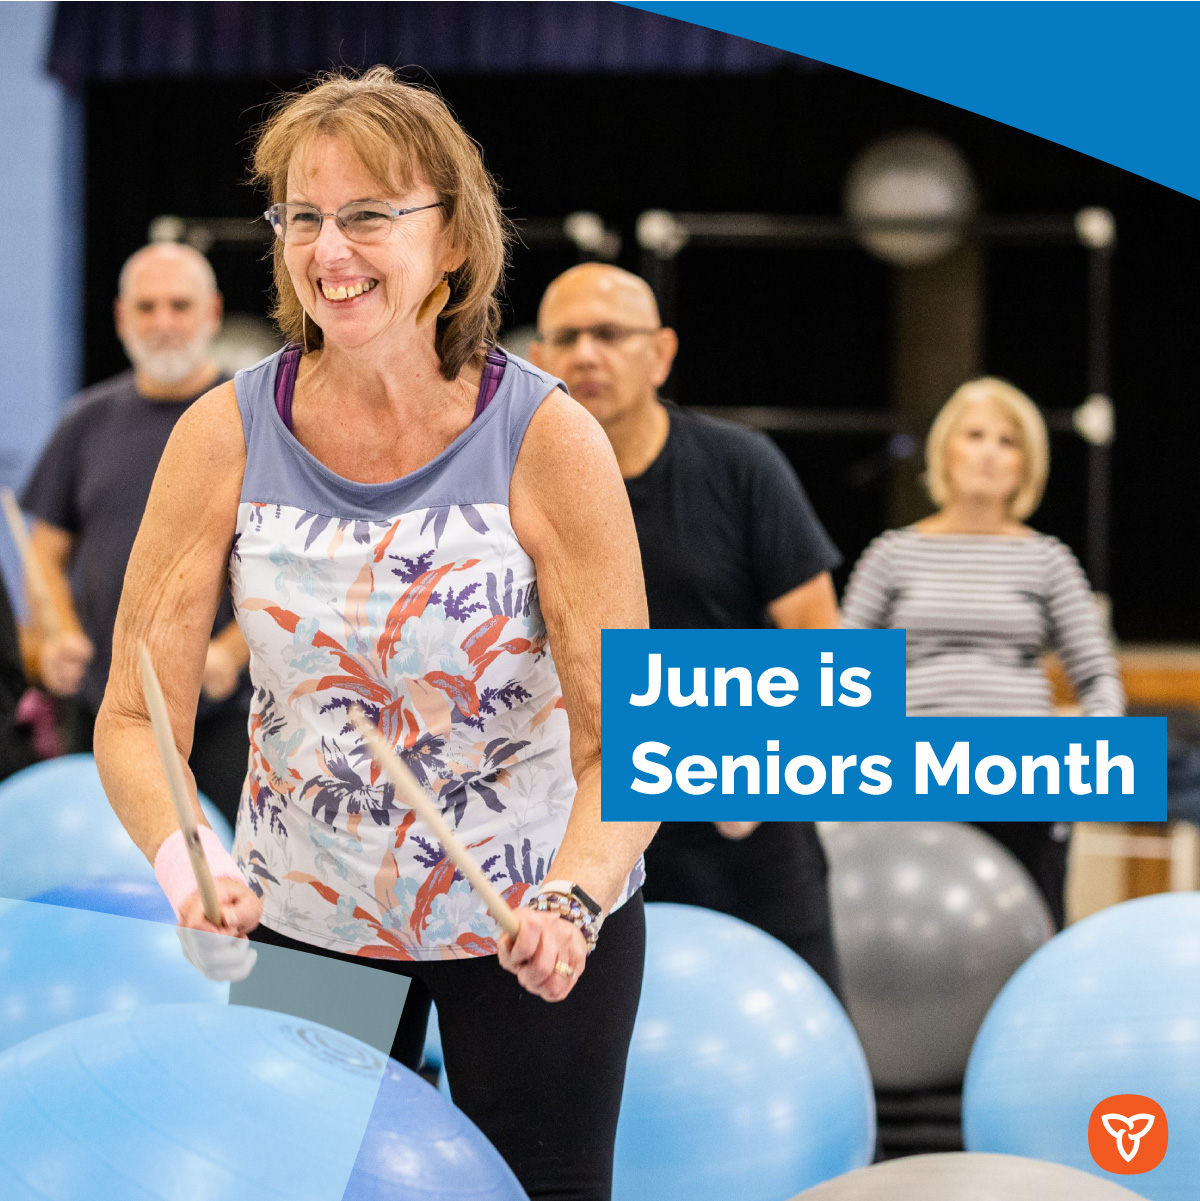 An older adult smiling while attending a drum fitness class with other older adults. Text reads: June is Seniors Month.